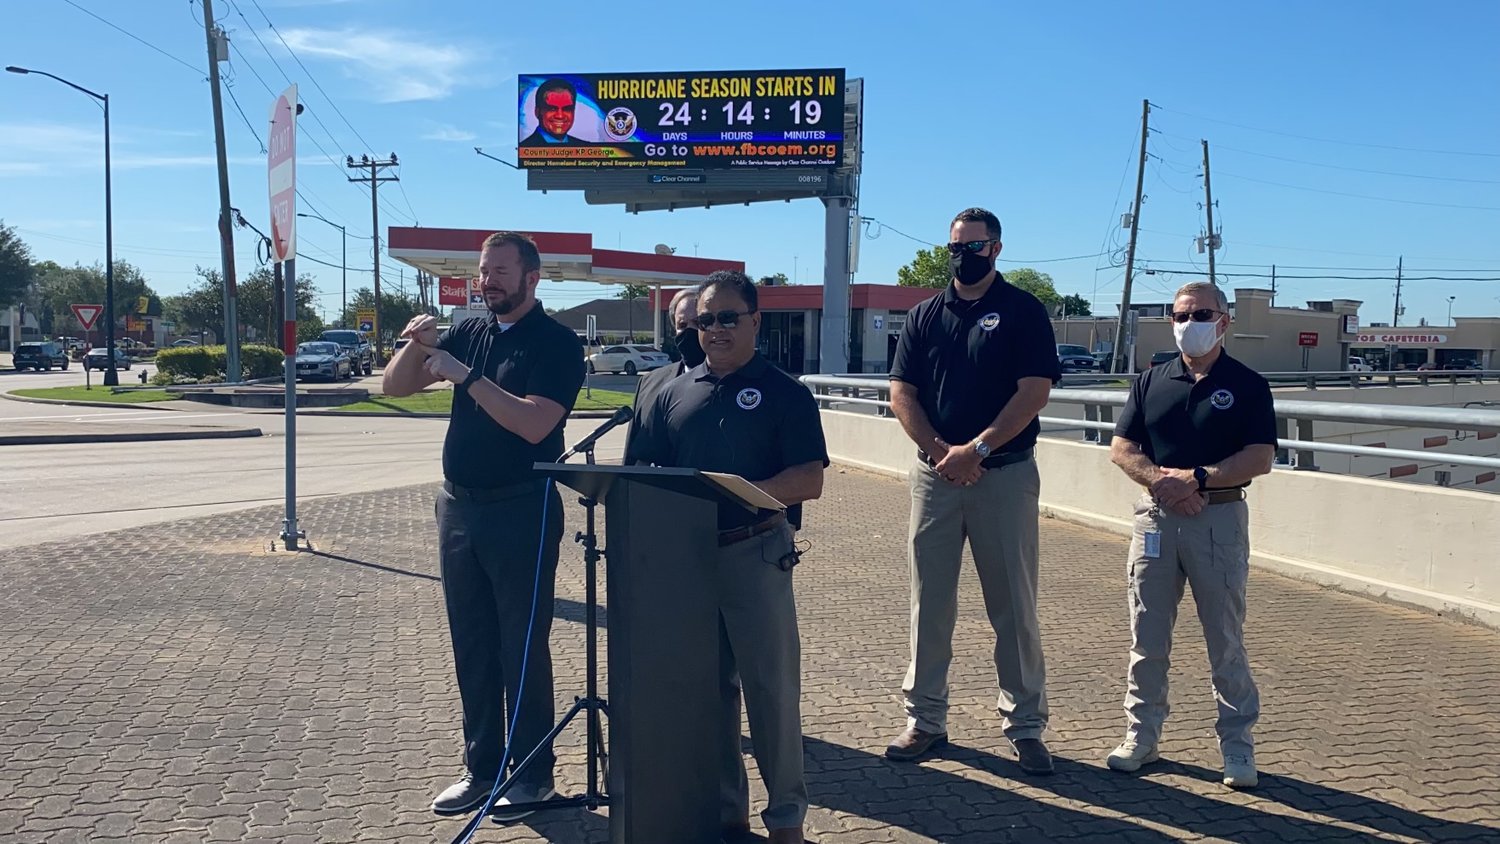 Fort Bend County Judge KP George speaks at a press conference announcing the launch of the county's new hurricane preparedness billboards in cooperation with Clear Channel Outdoor late last week.